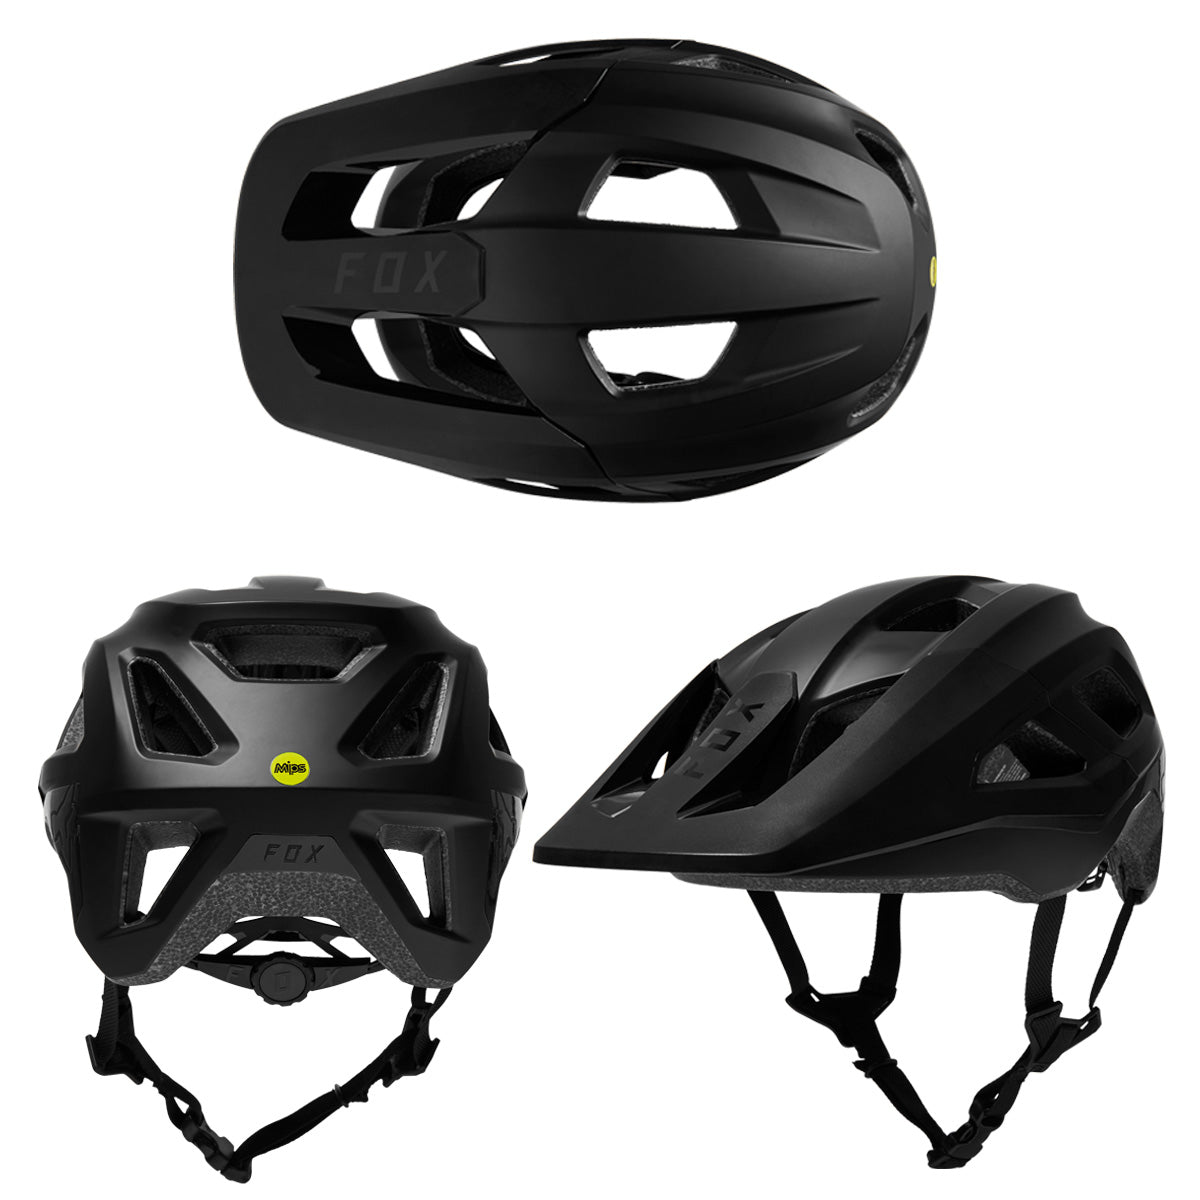 Fox Mainframe Youth MIPS Helmet - Youth - One Size Fits Most - Black - Black - AS-NZS 2063-2008 Standard